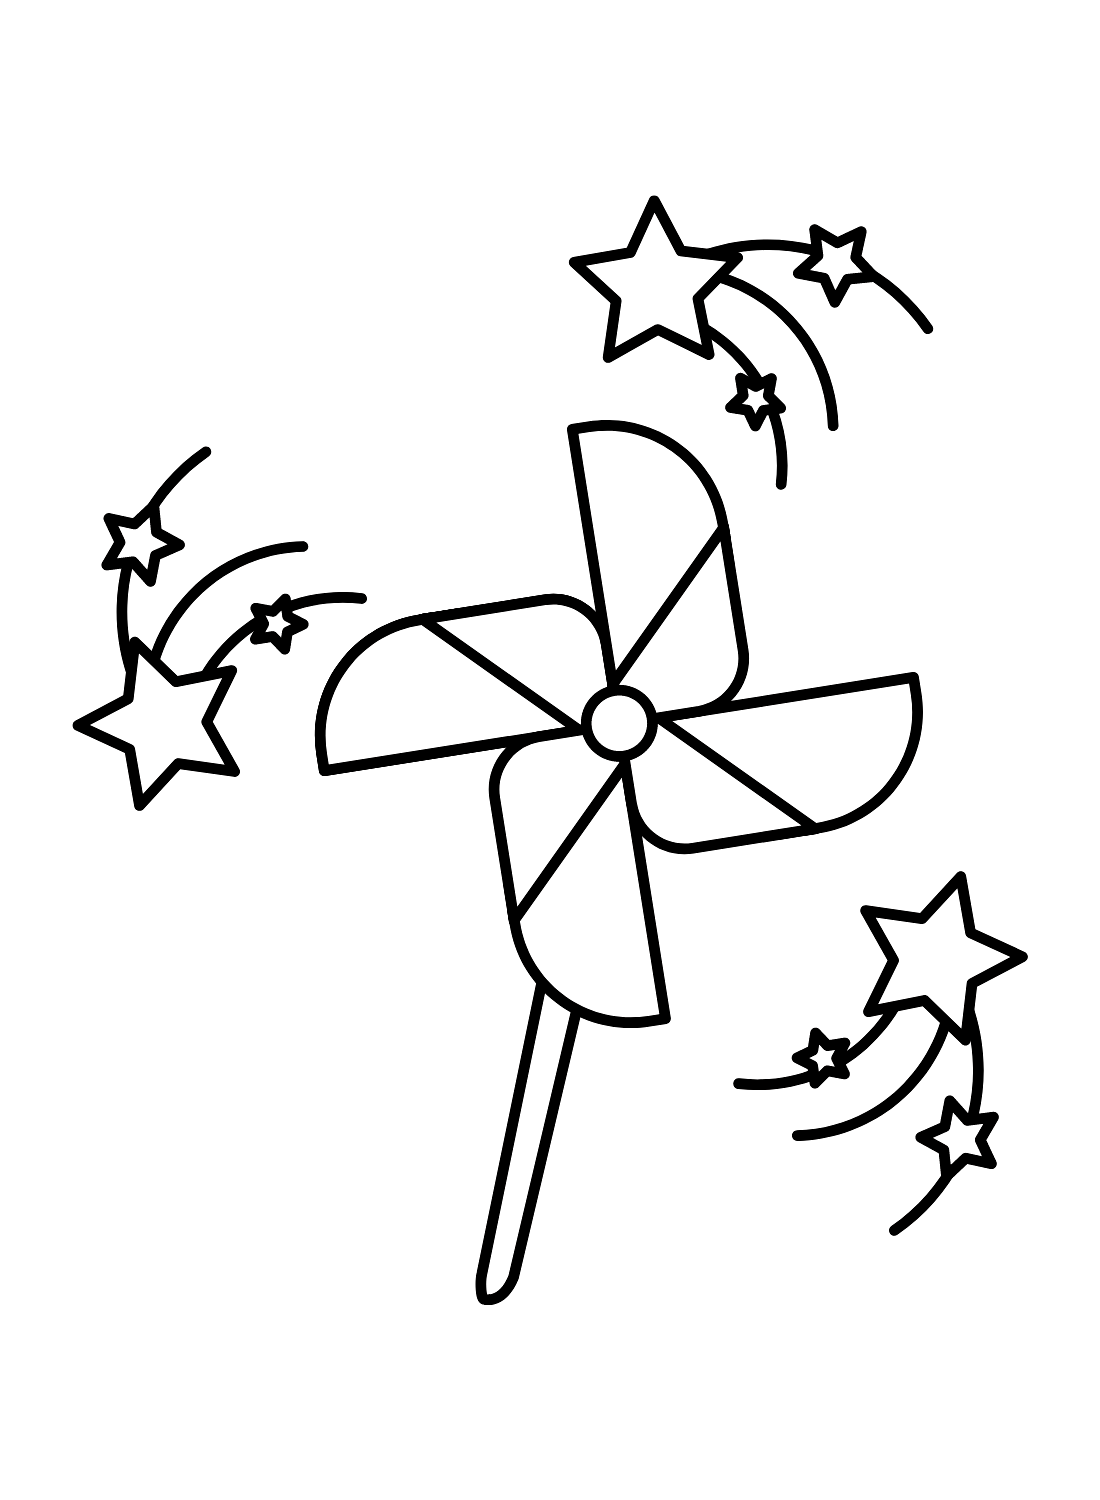 Pinwheel Toy with Stars Coloring Page